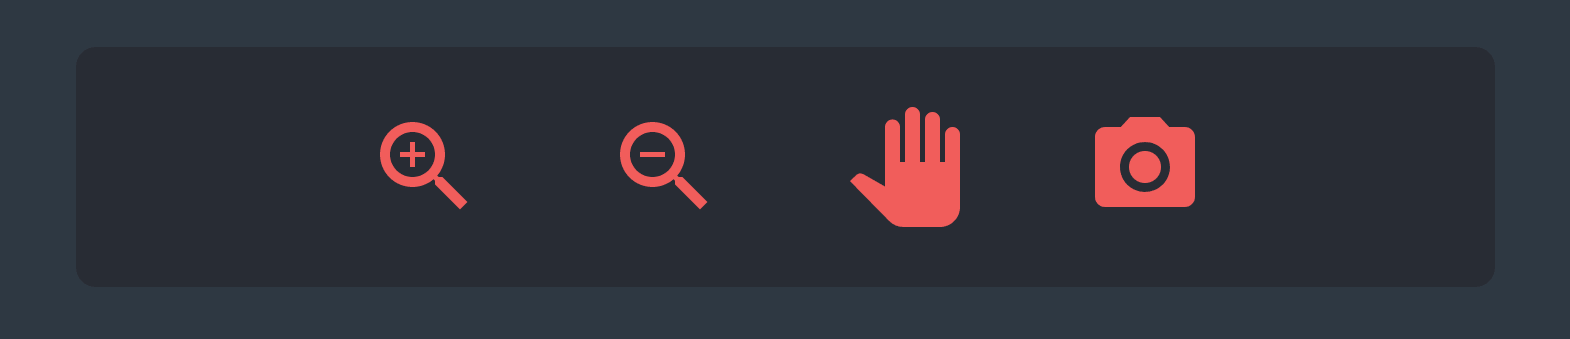 Universally recognized React Material UI icons for zoom, pan and photo capture